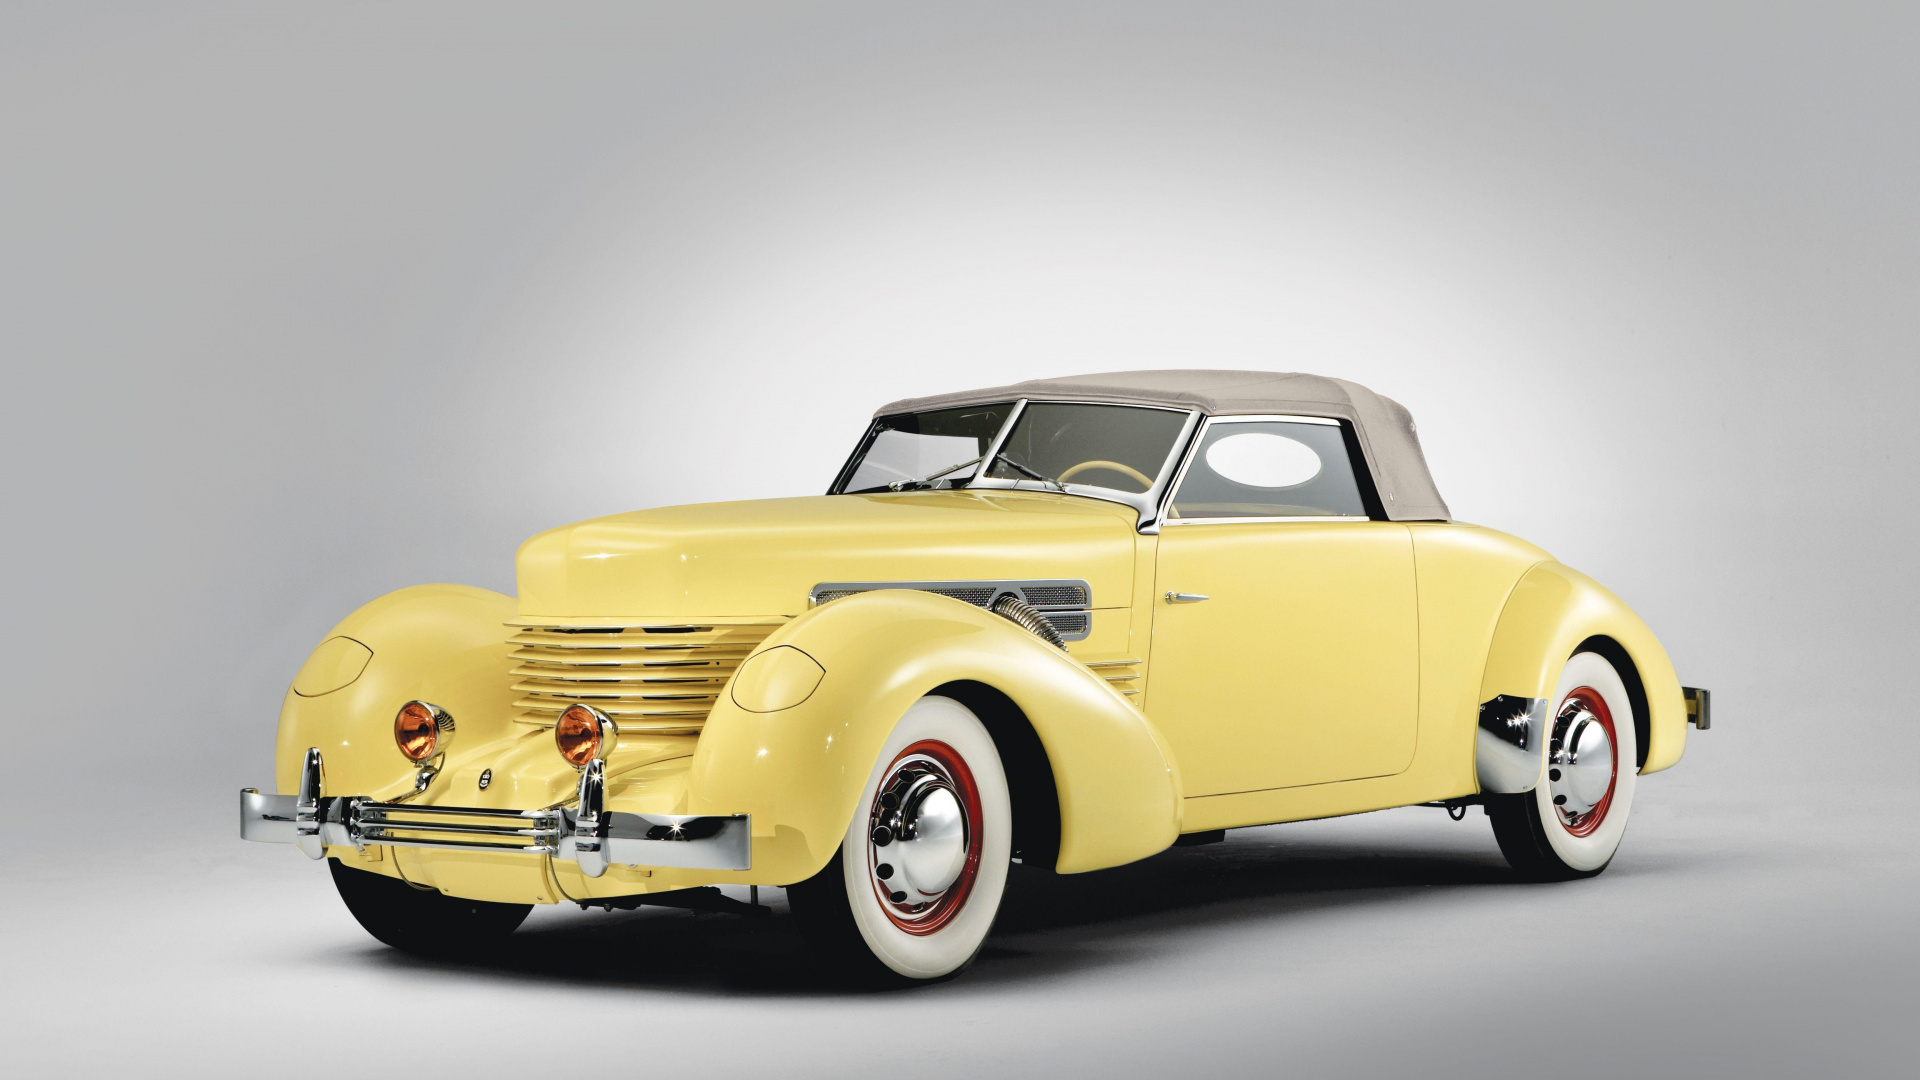 Yellow Vintage Car on White Background. Wallpaper in 1920x1080 Resolution